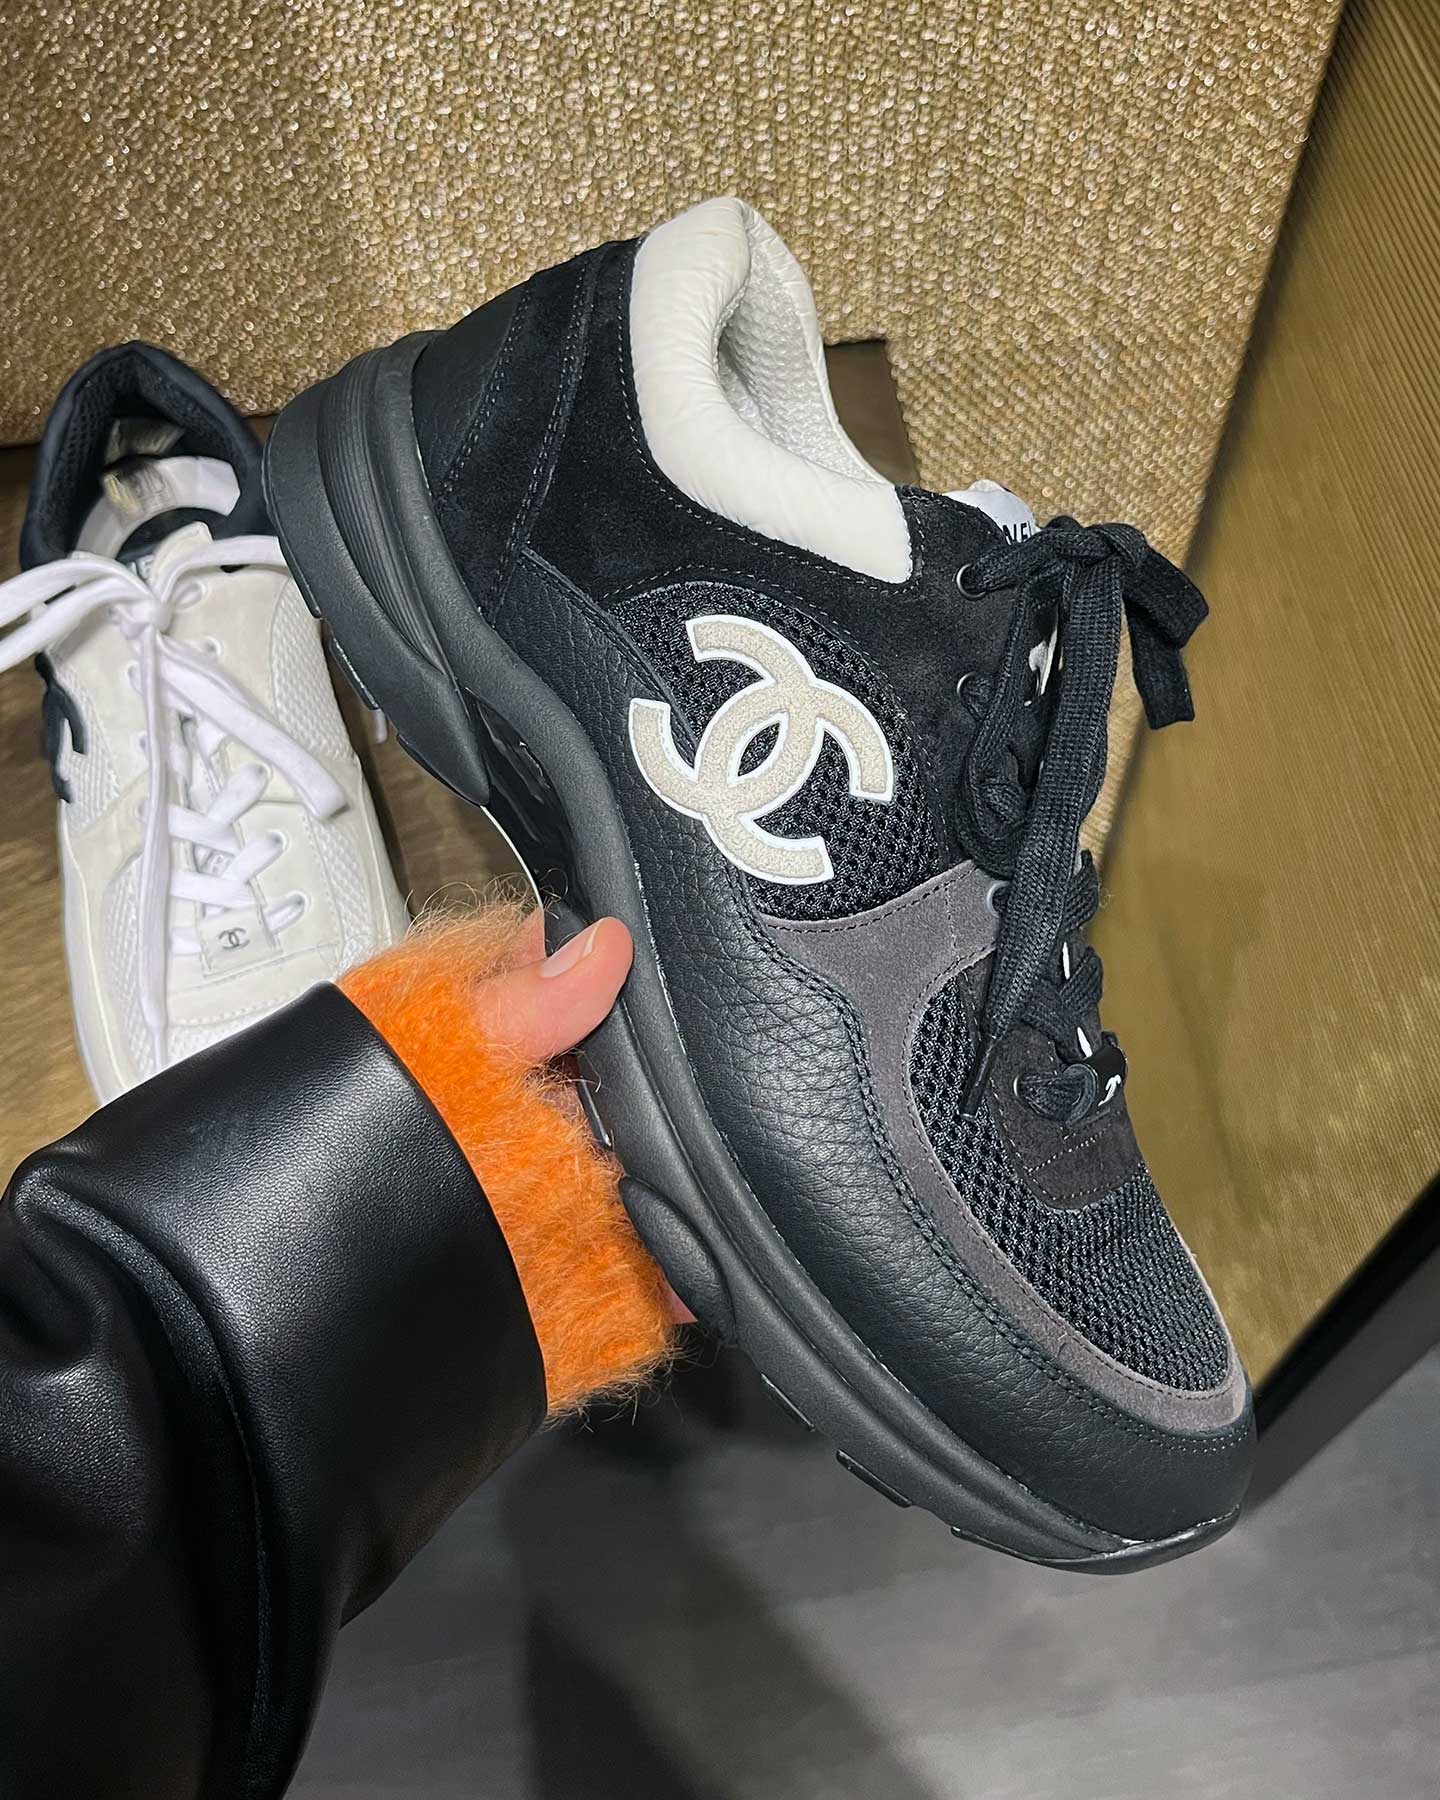 Chanel's Sneaker Game Is Quietly Improving